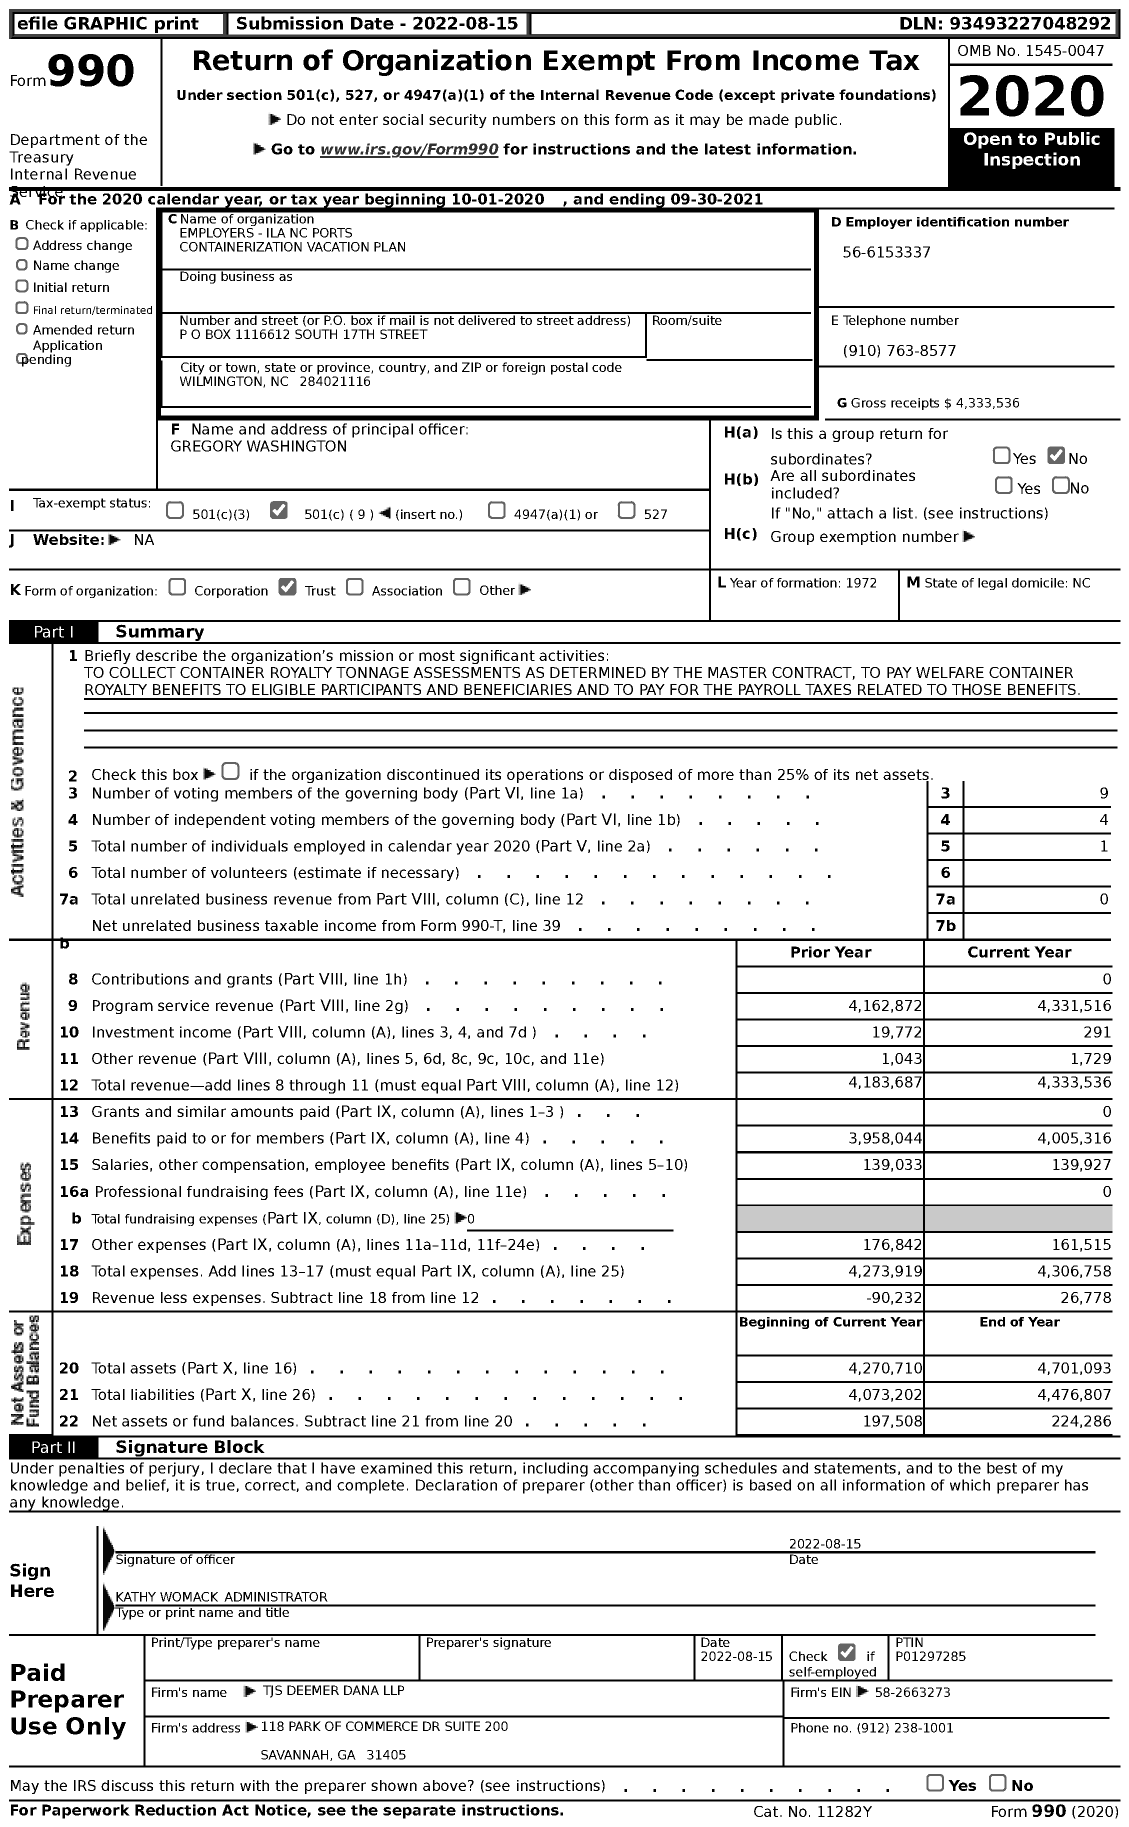 Image of first page of 2020 Form 990 for Trustees of the Employees ILA AFL CIO Containerization Vacation Plan